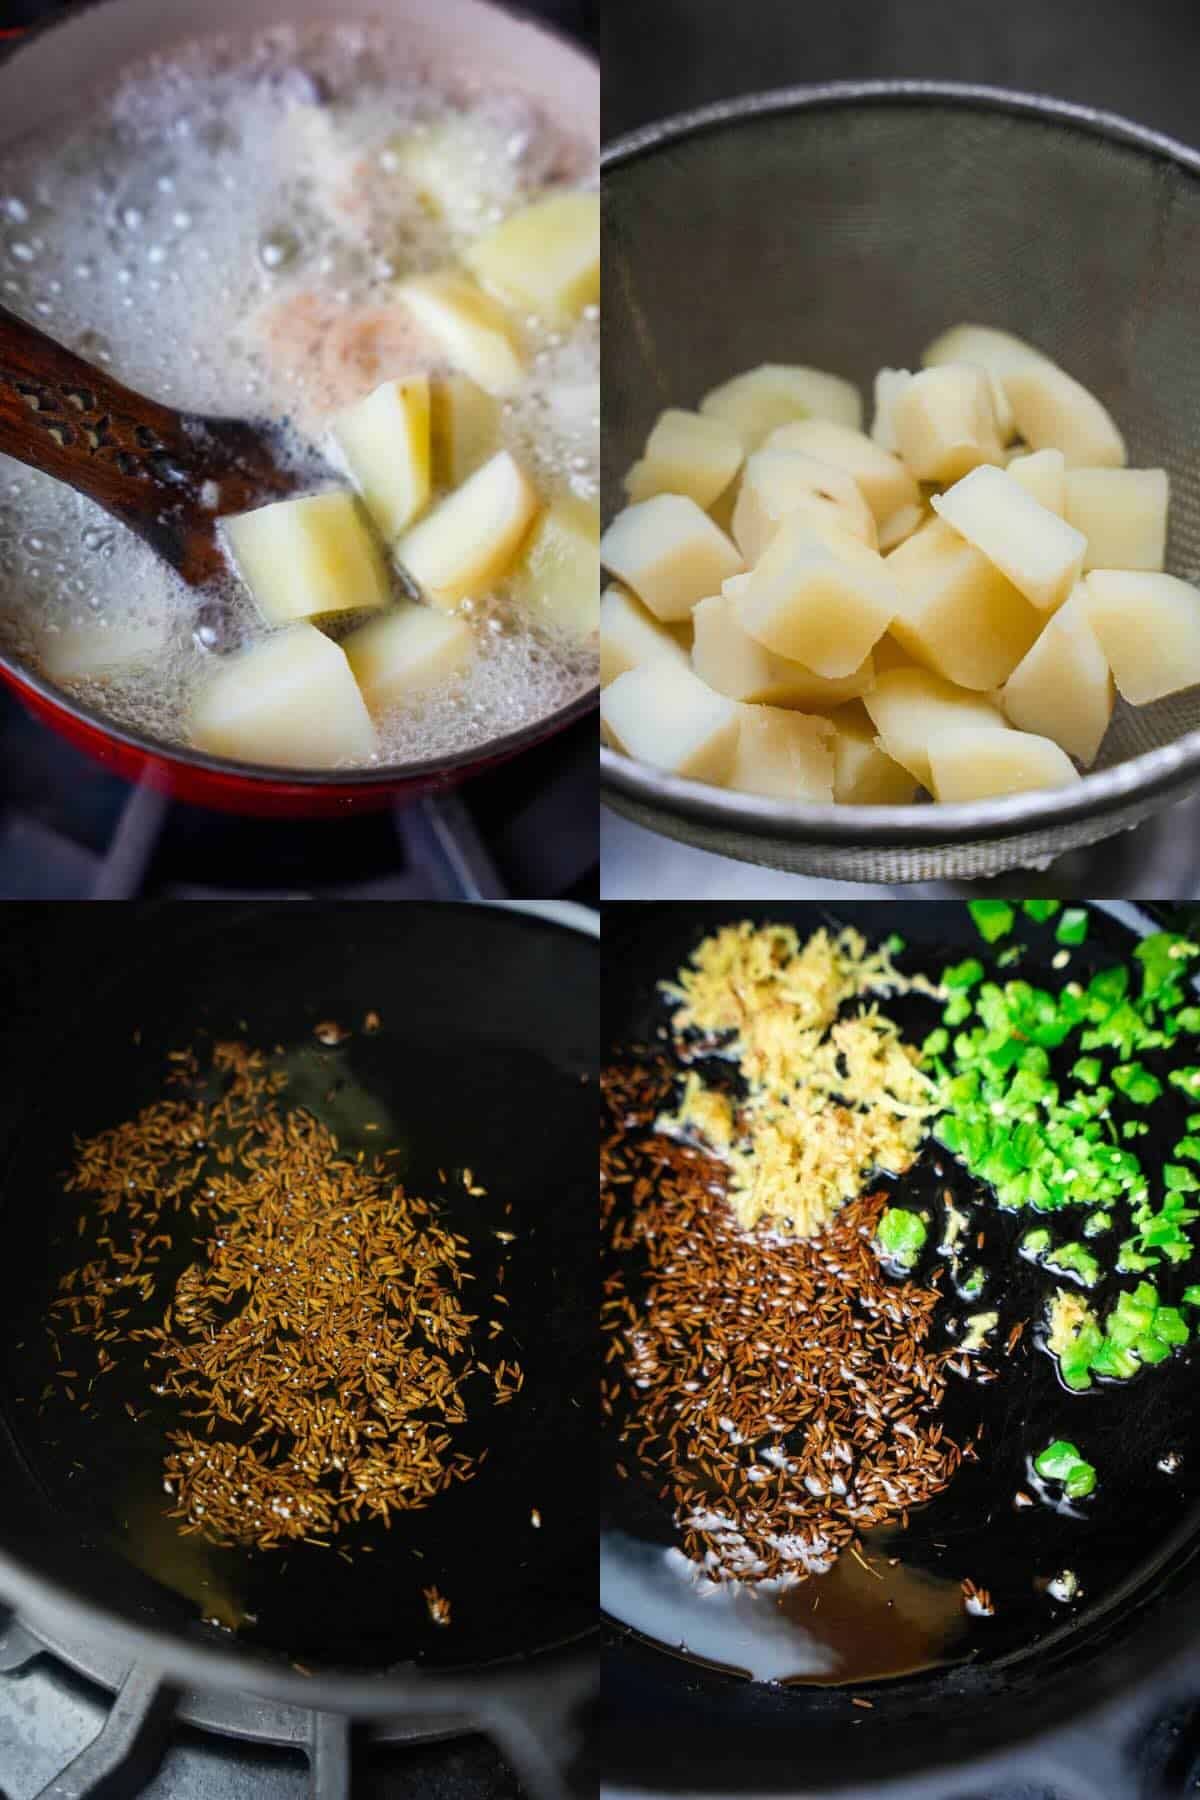 A series of photos showing how to cook and drain the potatoes, and start frying the whole spices for saag aloo.